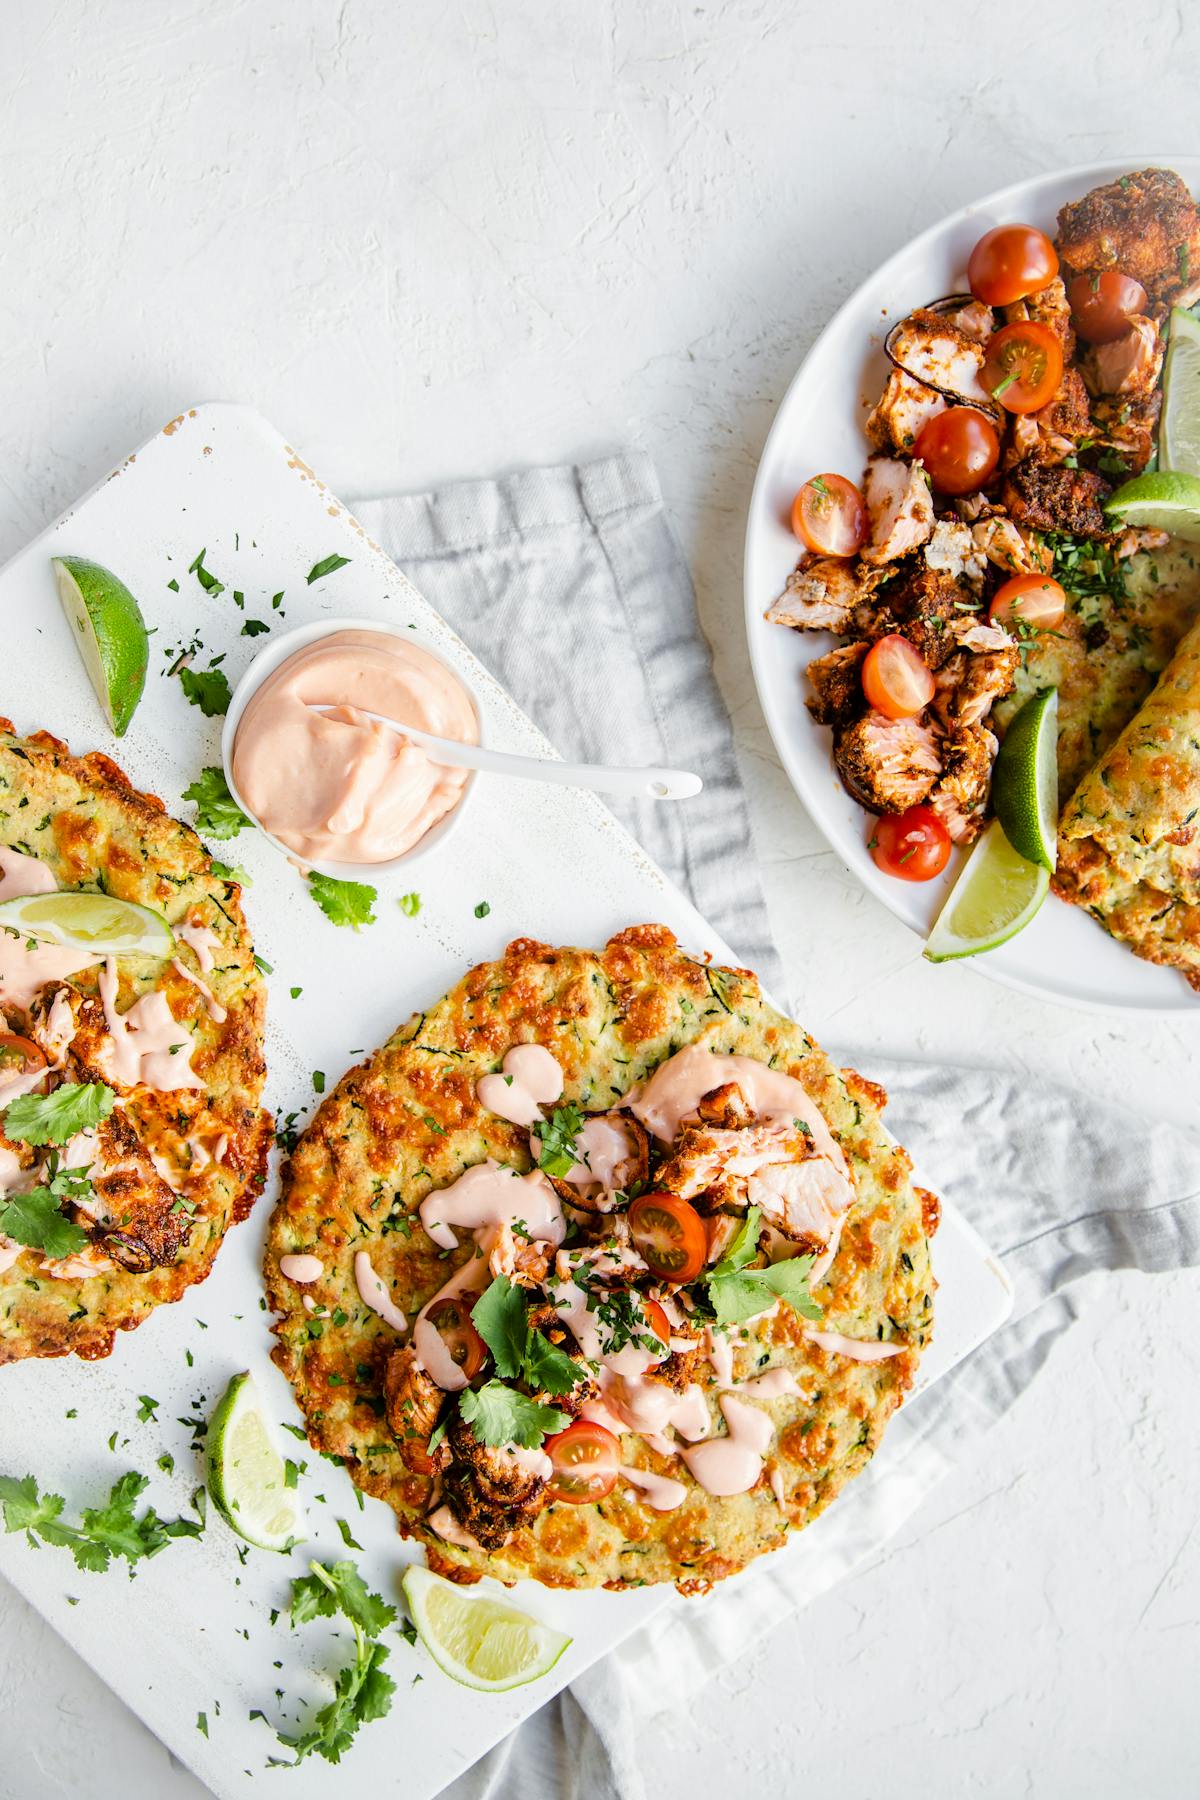 Low carb fish tacos with zucchini tortillas